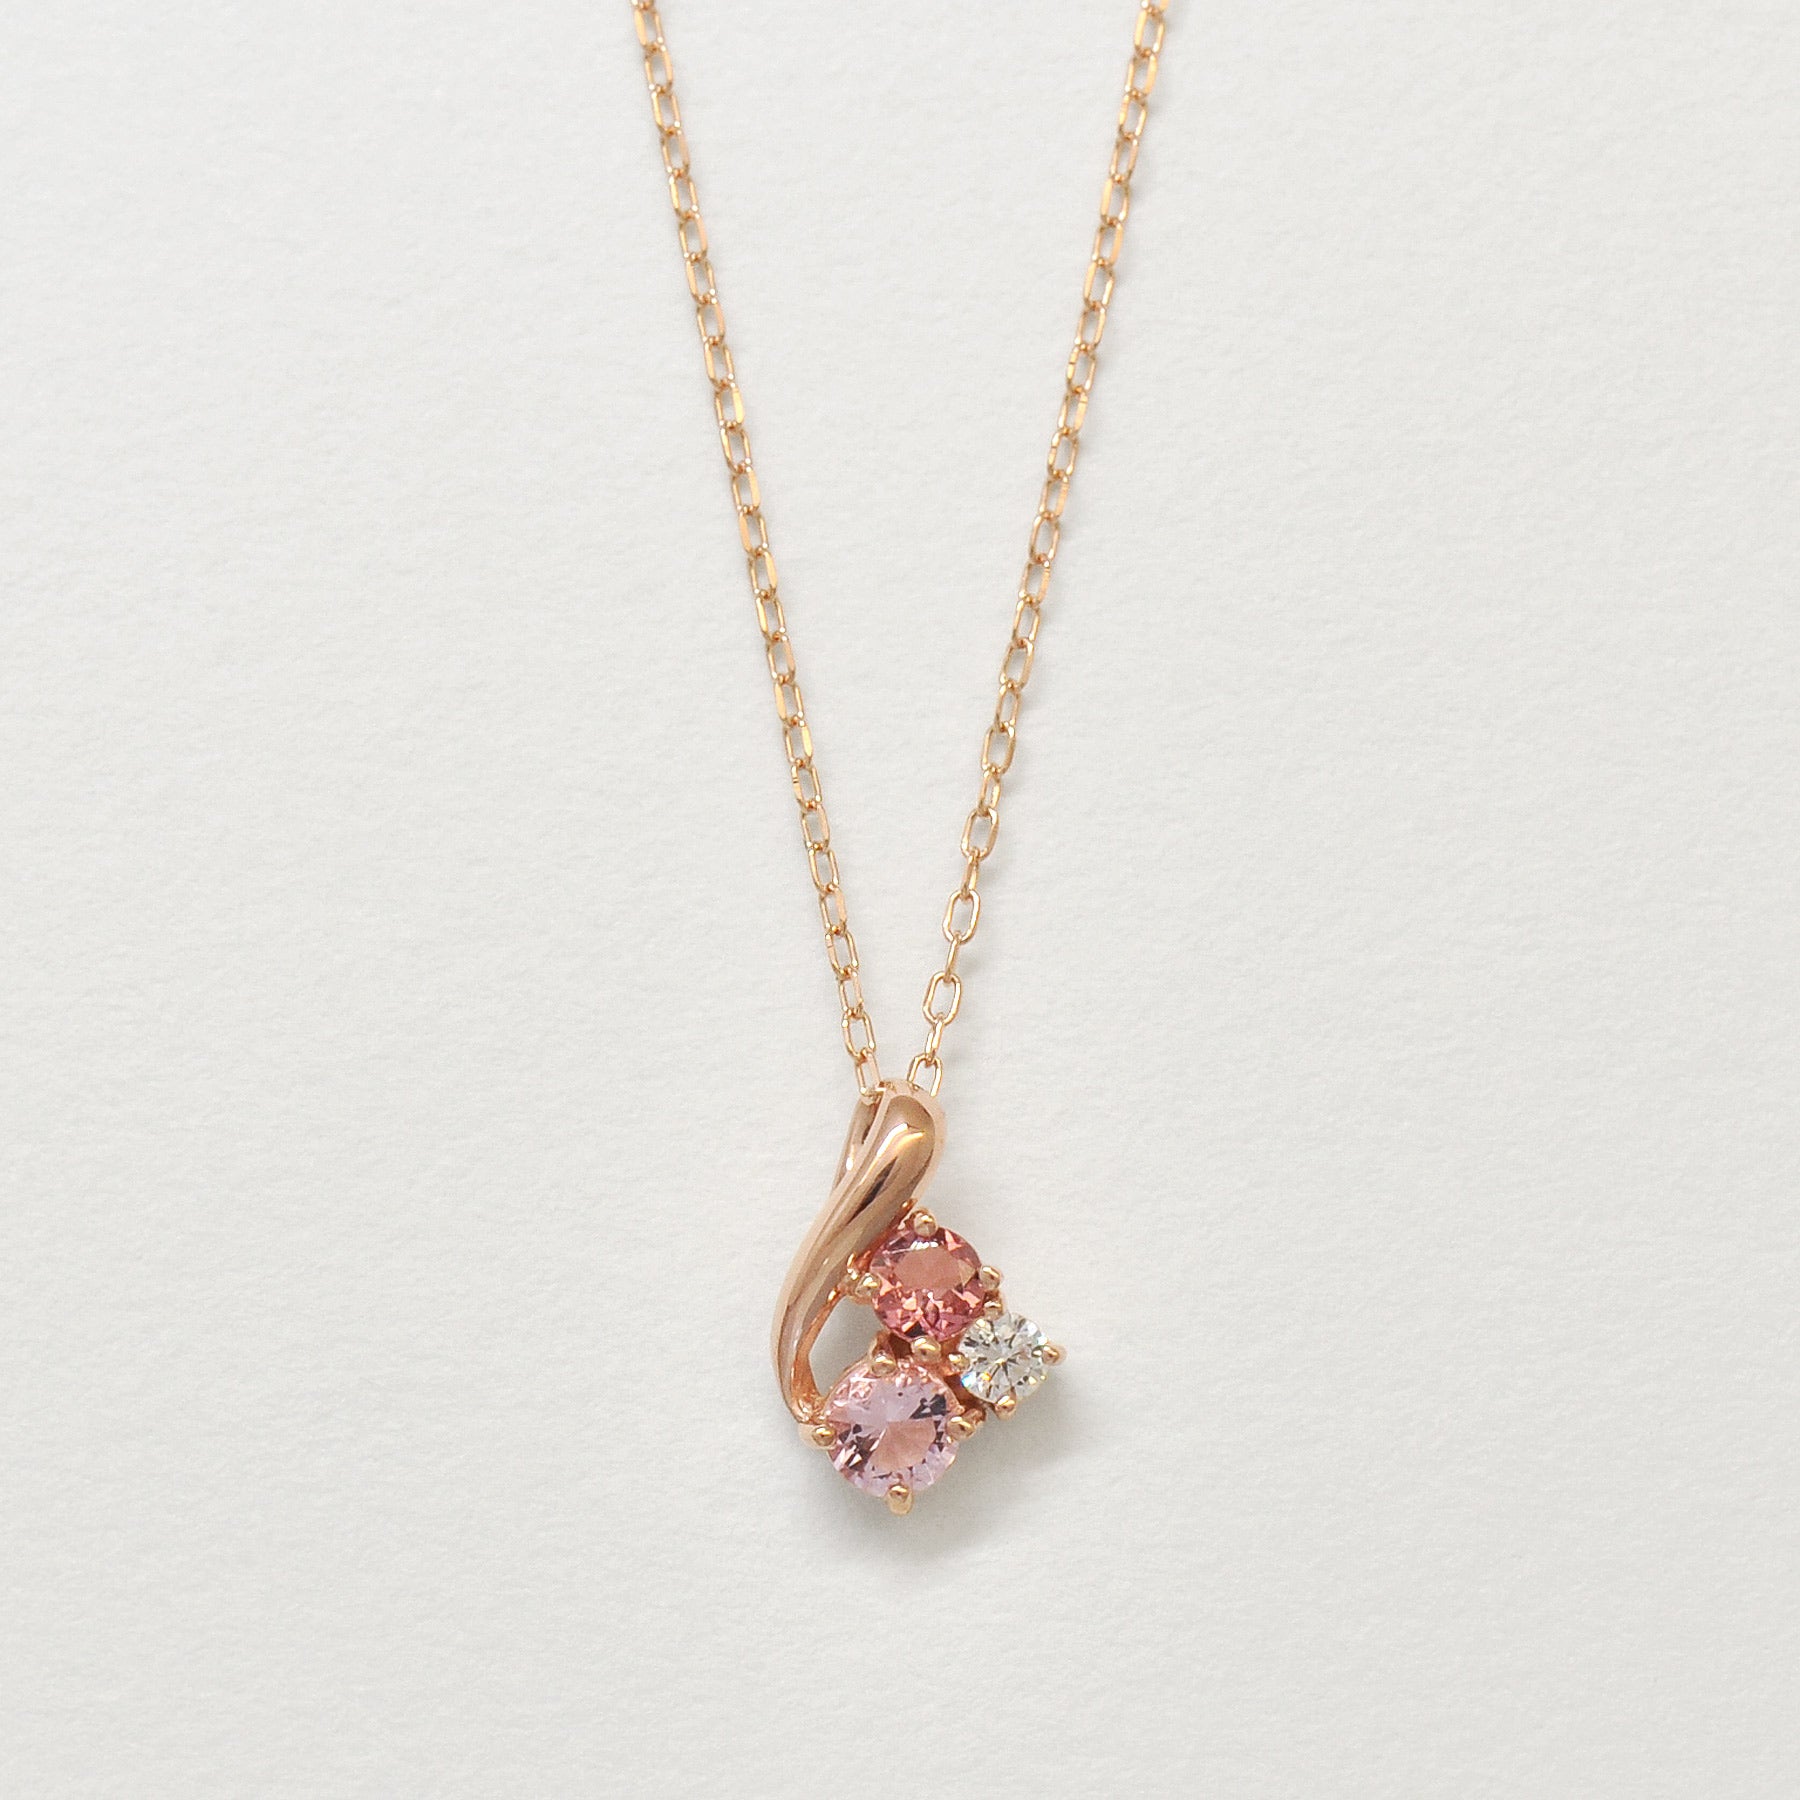 10K Rose Gold Pink Tourmaline Twisted Necklace - Product Image